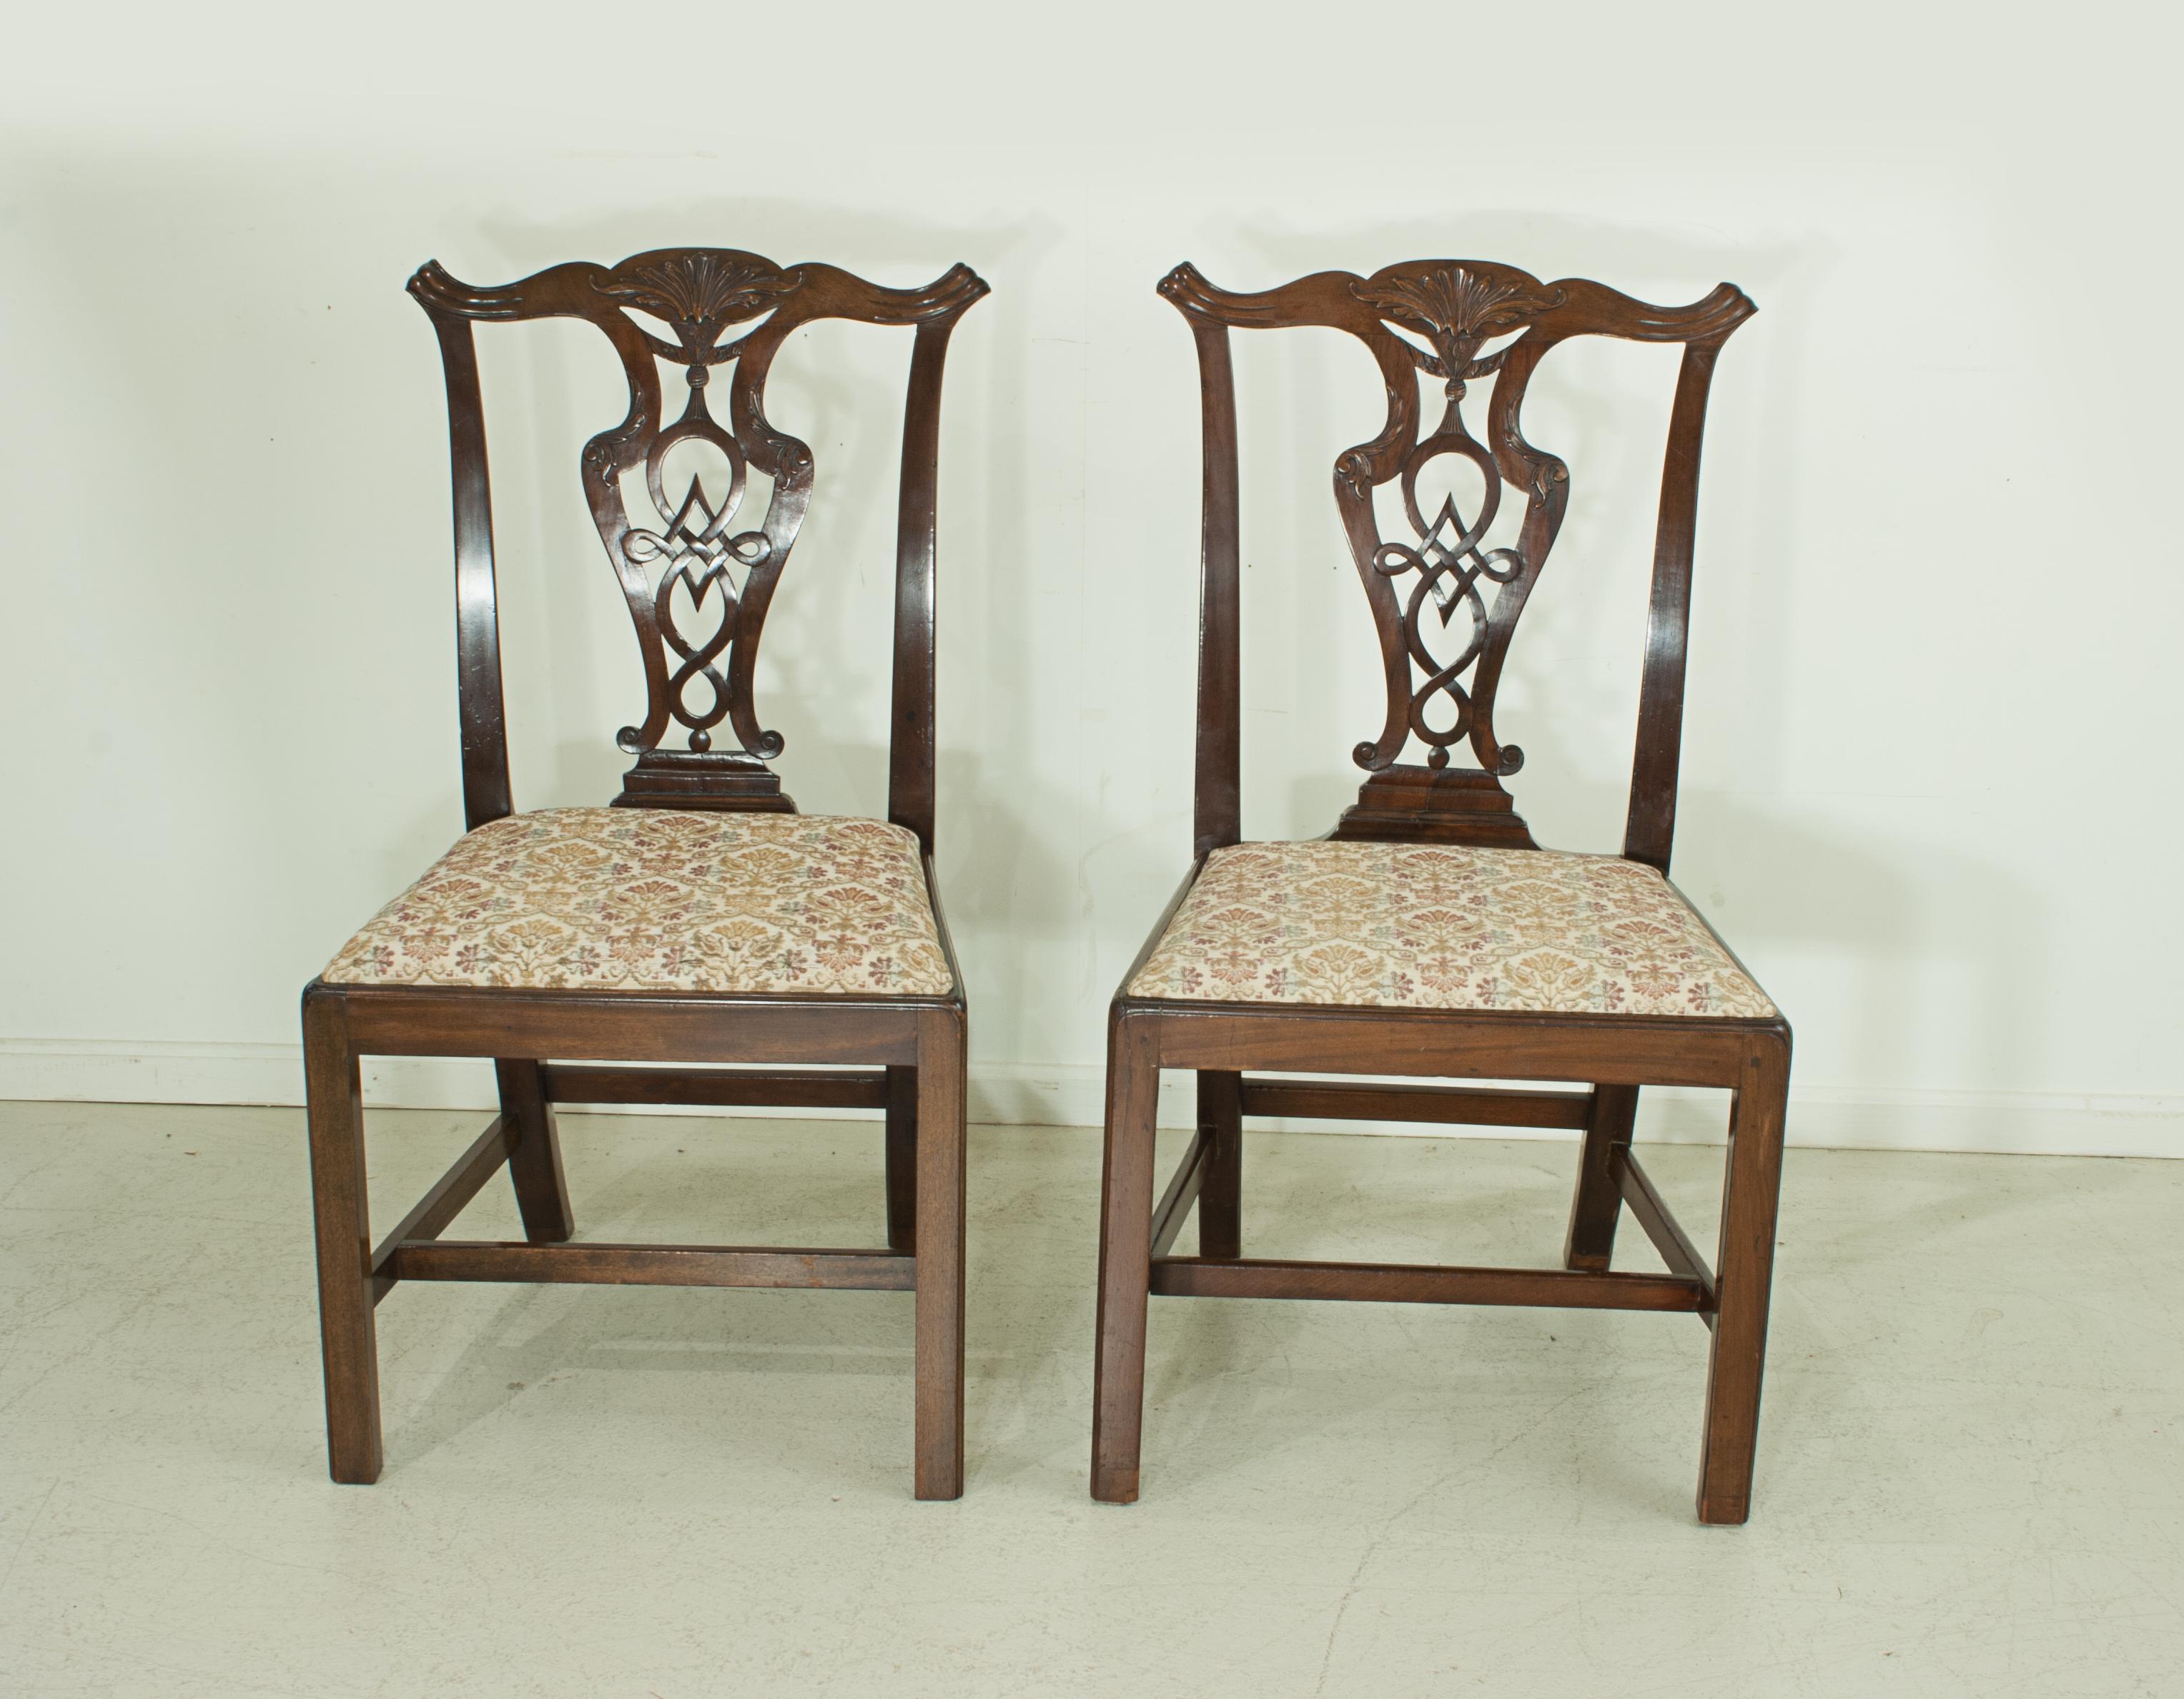 Pair of Chippendale style Mahogany dinning chairs.
A pair of very good quality early 19th century mahogany dinning chairs in the Chippendale style. The chairs with intricate carved back splats and drop-in seats.

Dimensions:
Height
98 cm / 38